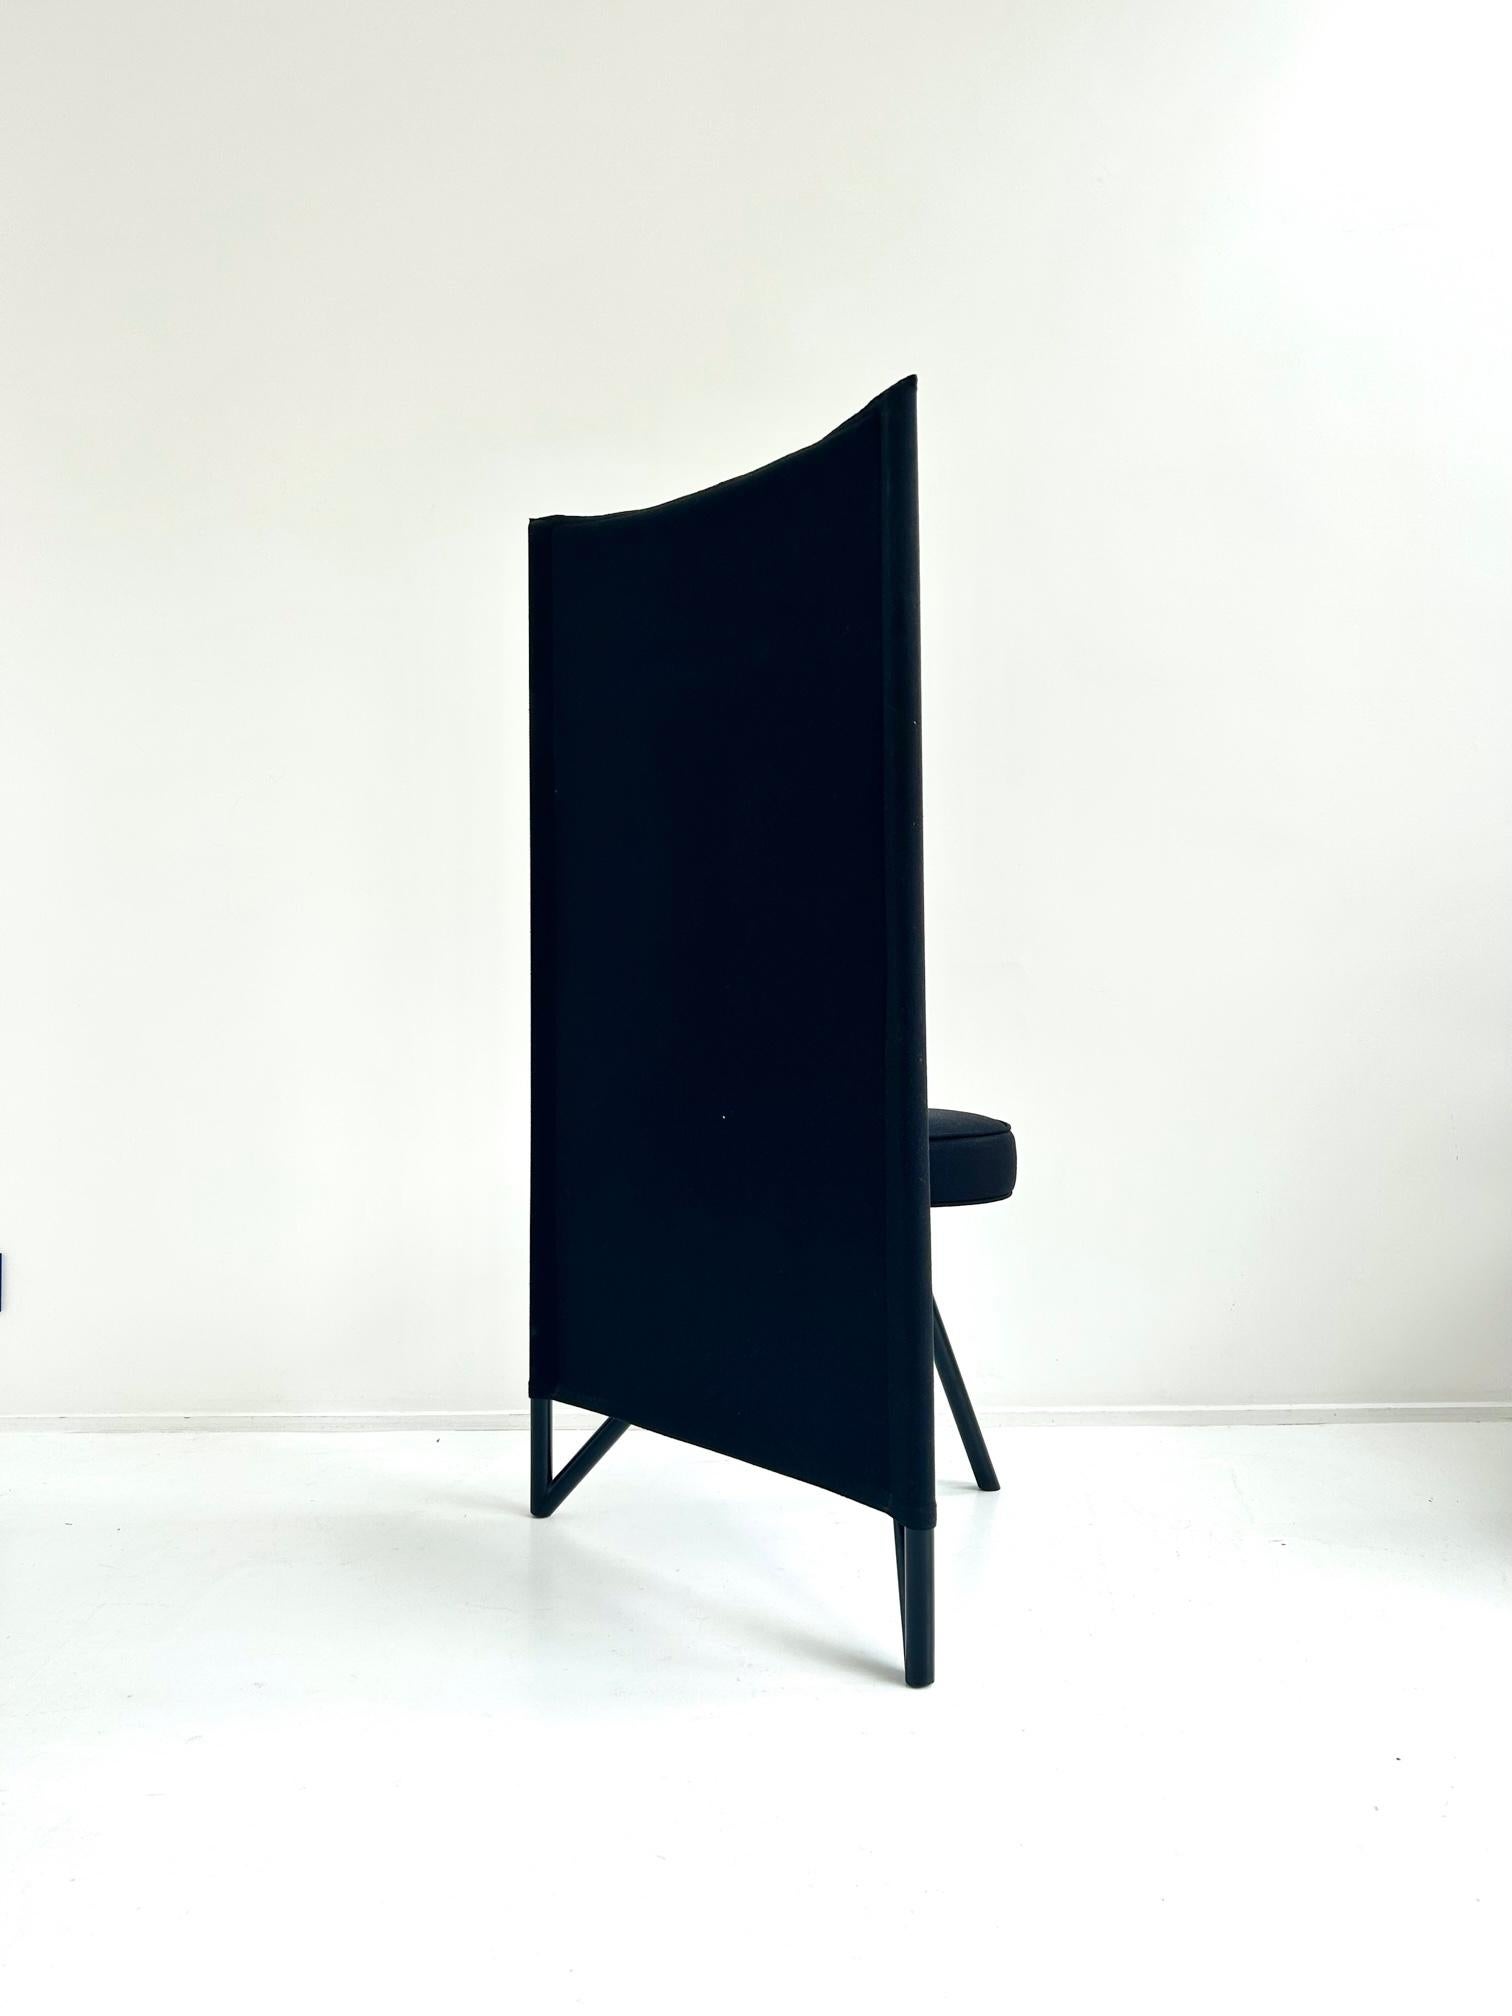 Metal Miss Wirt Chair by Philippe Starck for Disform 1982